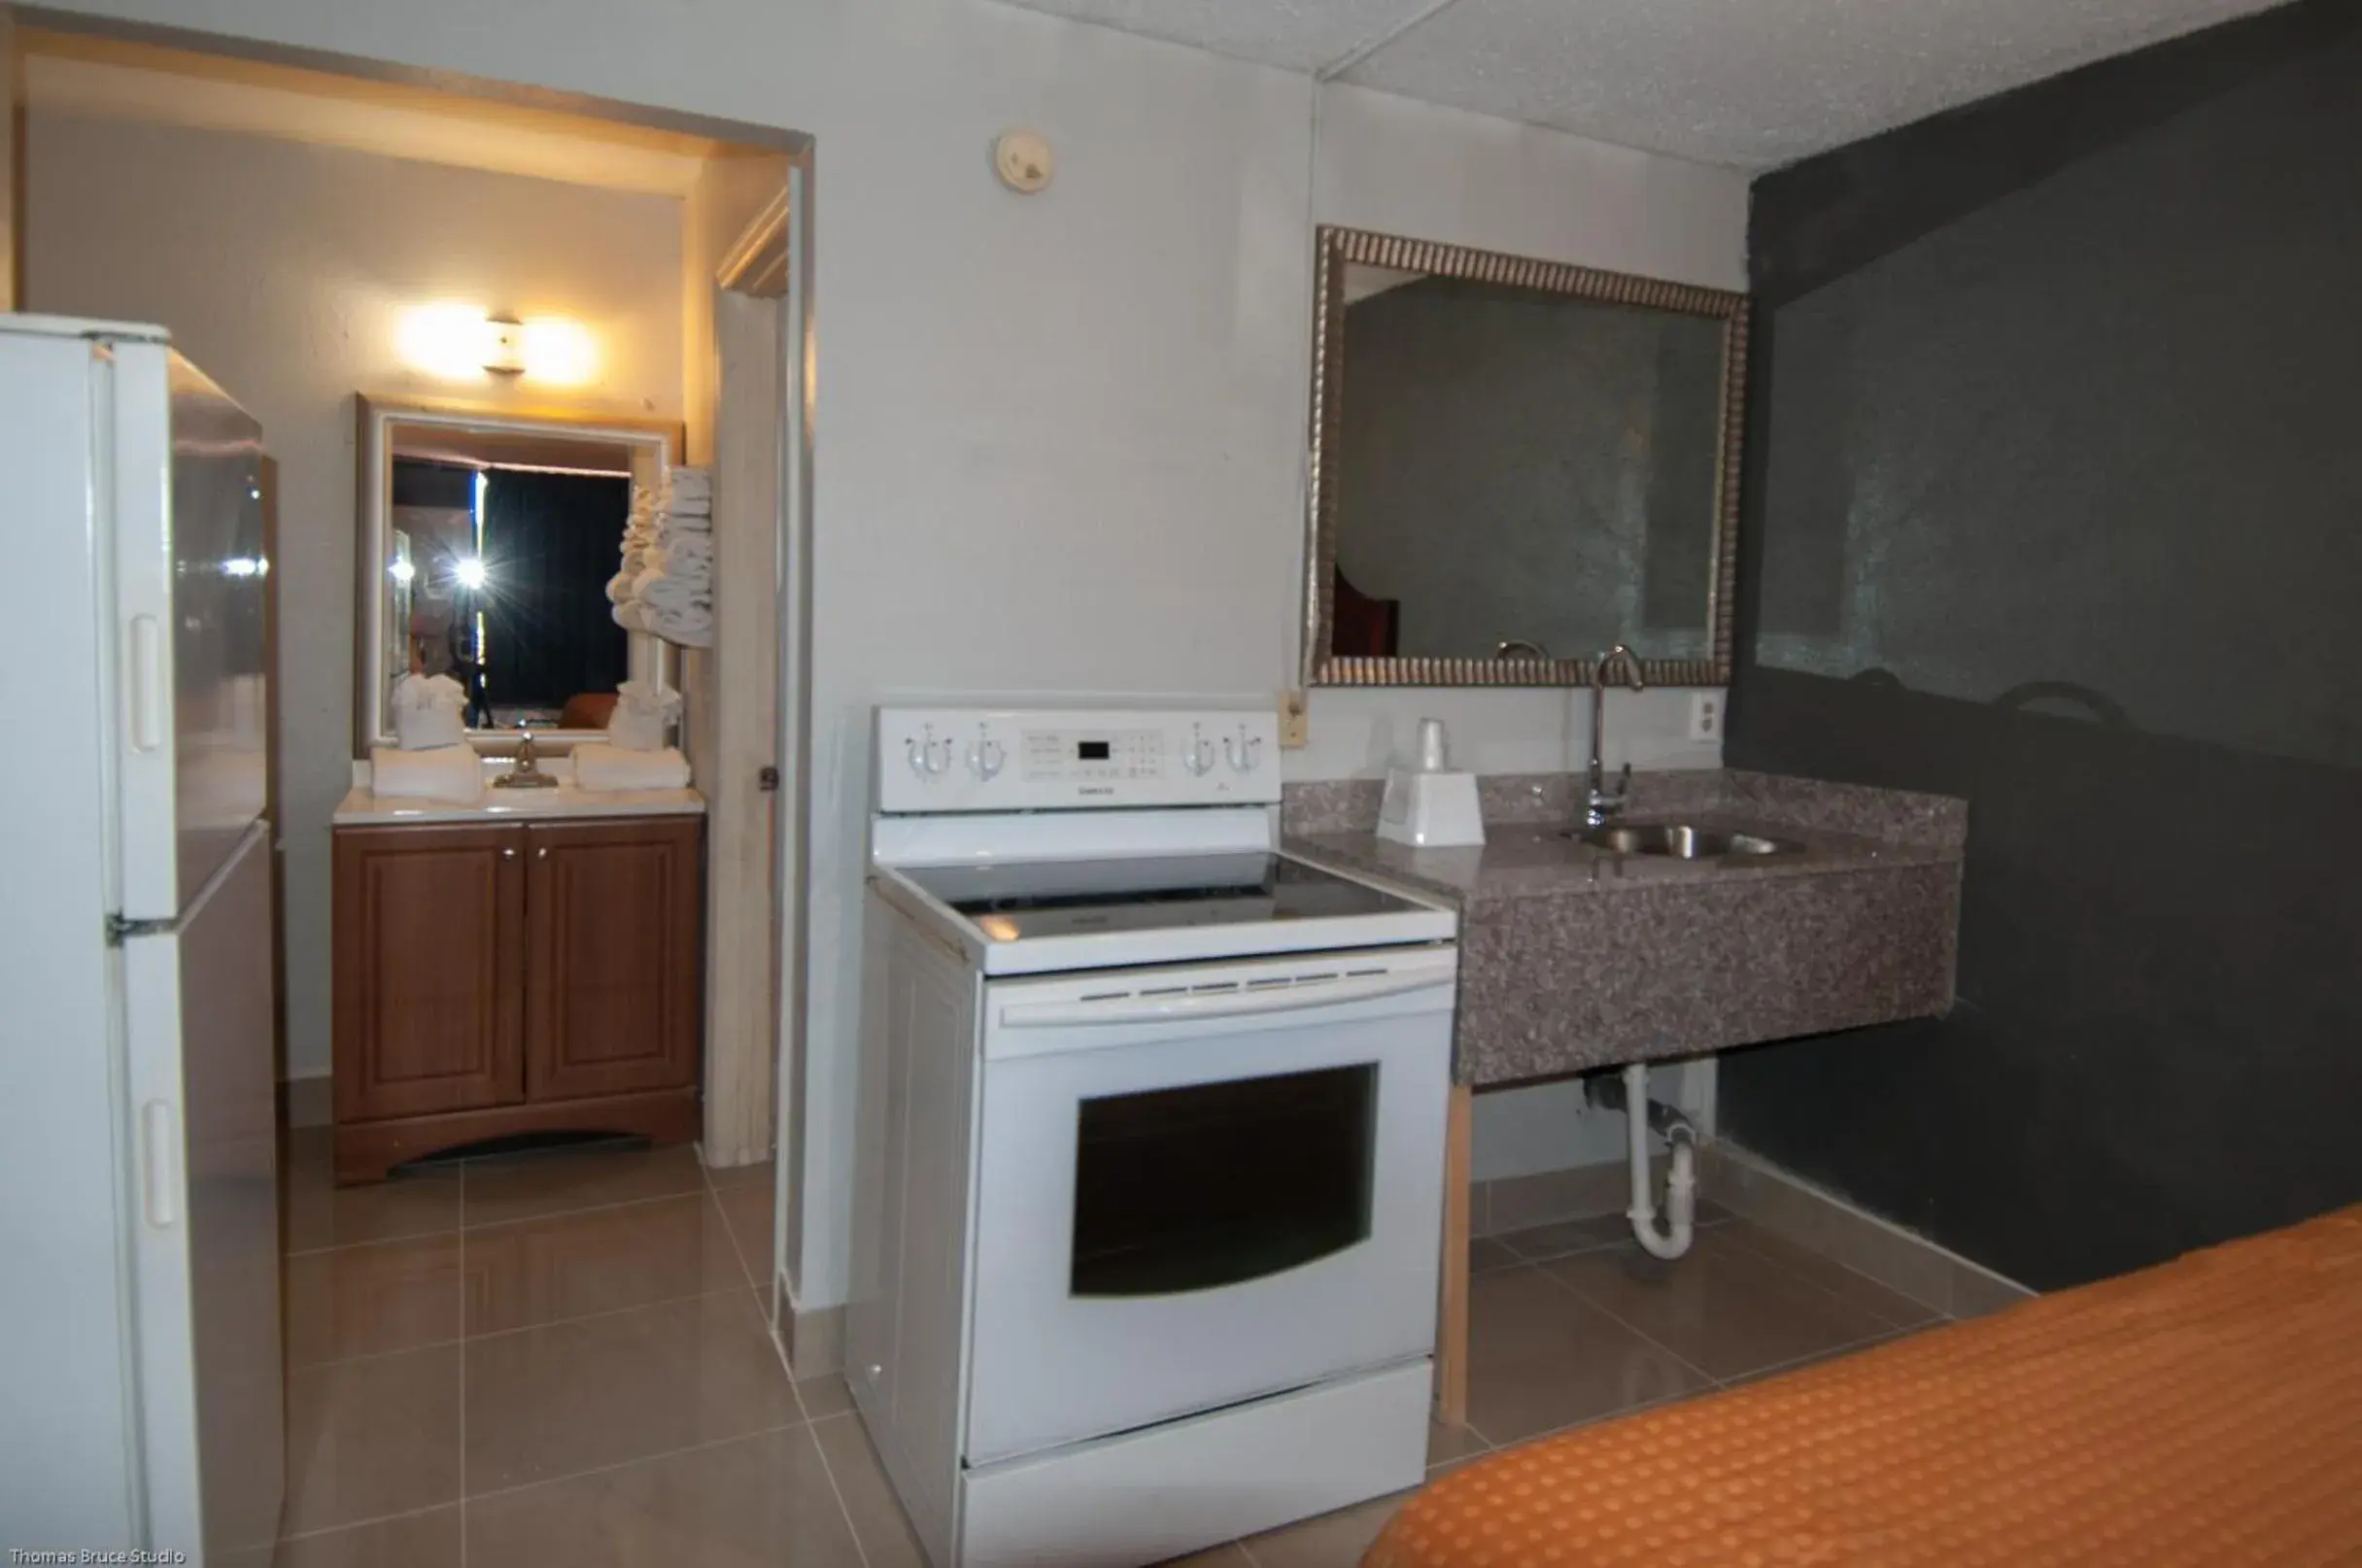 Kitchen/Kitchenette in Express Inn & Suites - 5 Miles from St Petersburg Clearwater Airport